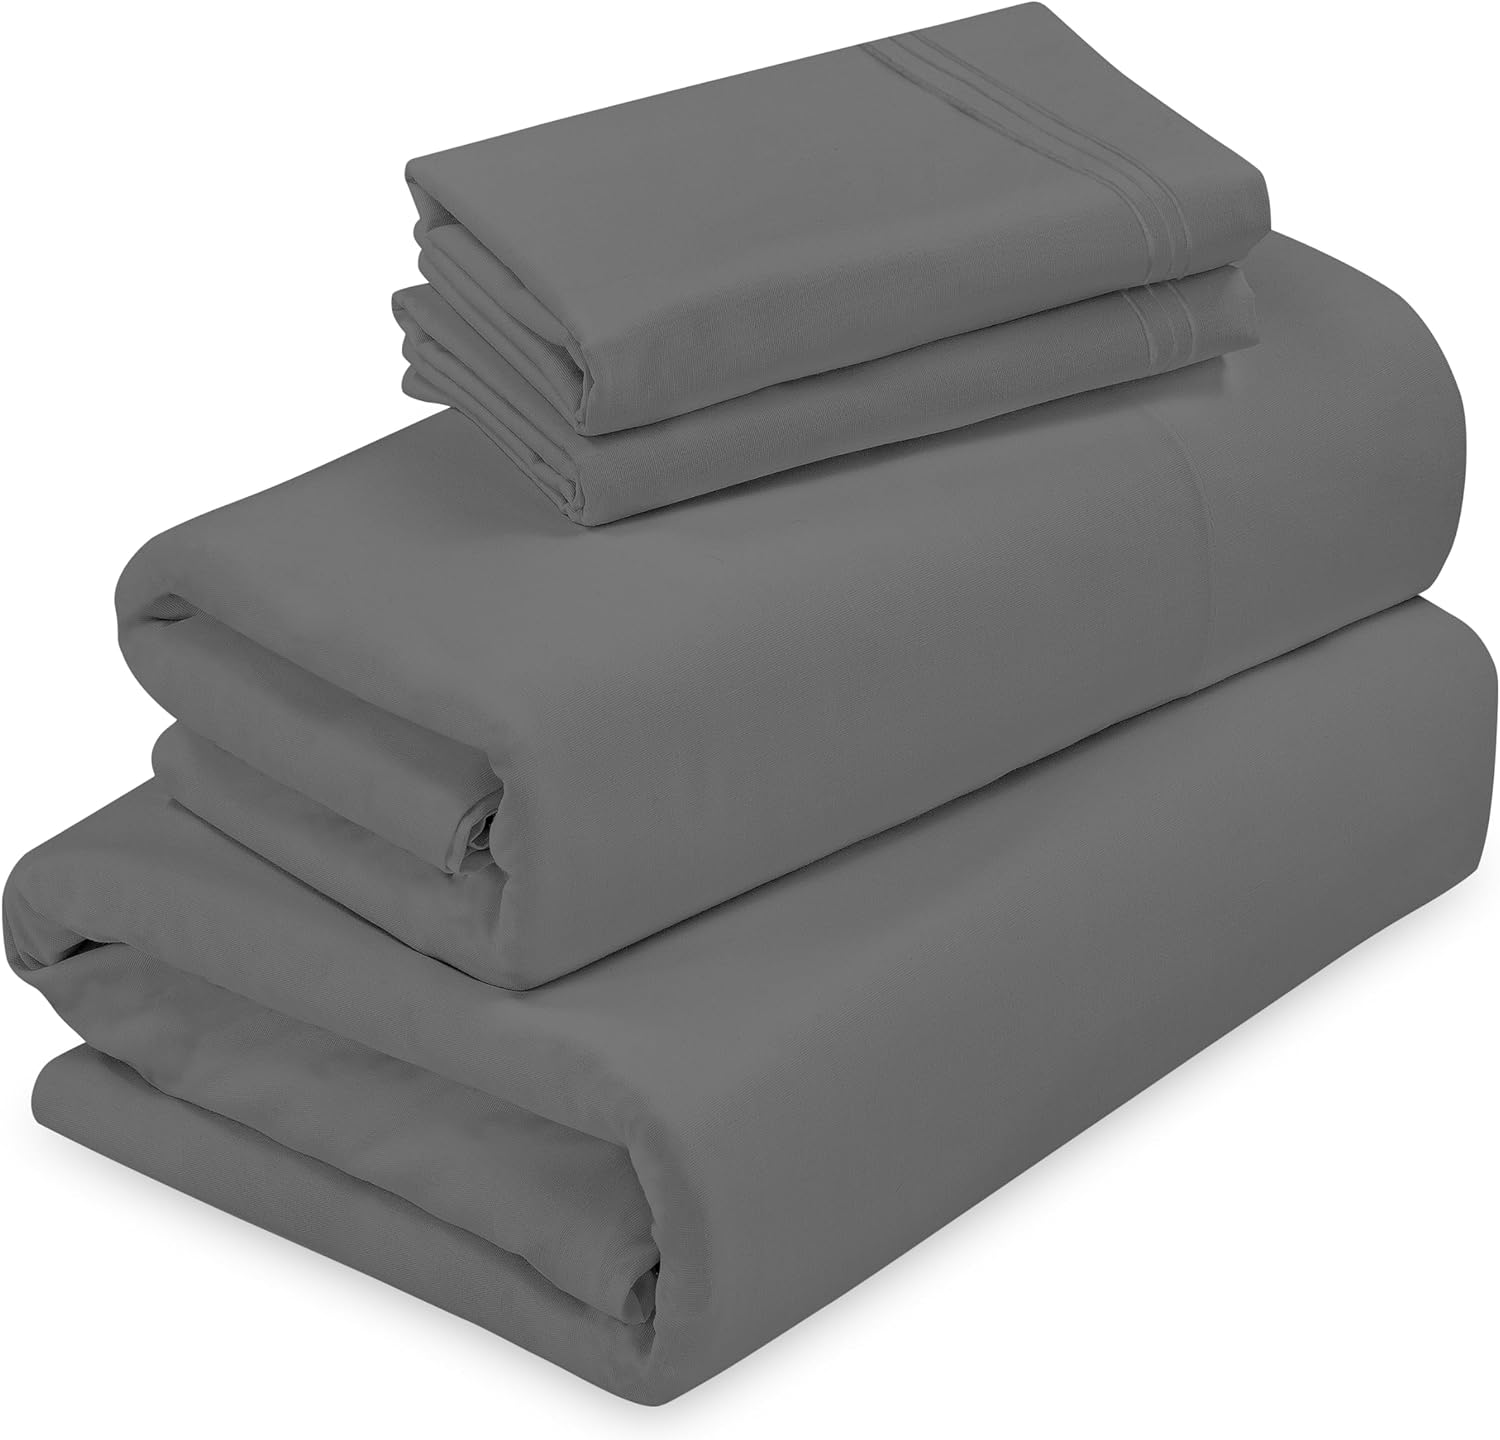 ROYALE LINENS - 4 Piece Queen Bed Sheet - Soft Brushed Microfiber 1800 Bedding Set - 1 Fitted Sheet, 1 Flat Sheet, 2 Pillow Cases - Wrinkle & Fade Resistant Luxury Queen Size Sheet Set (Queen, Grey)